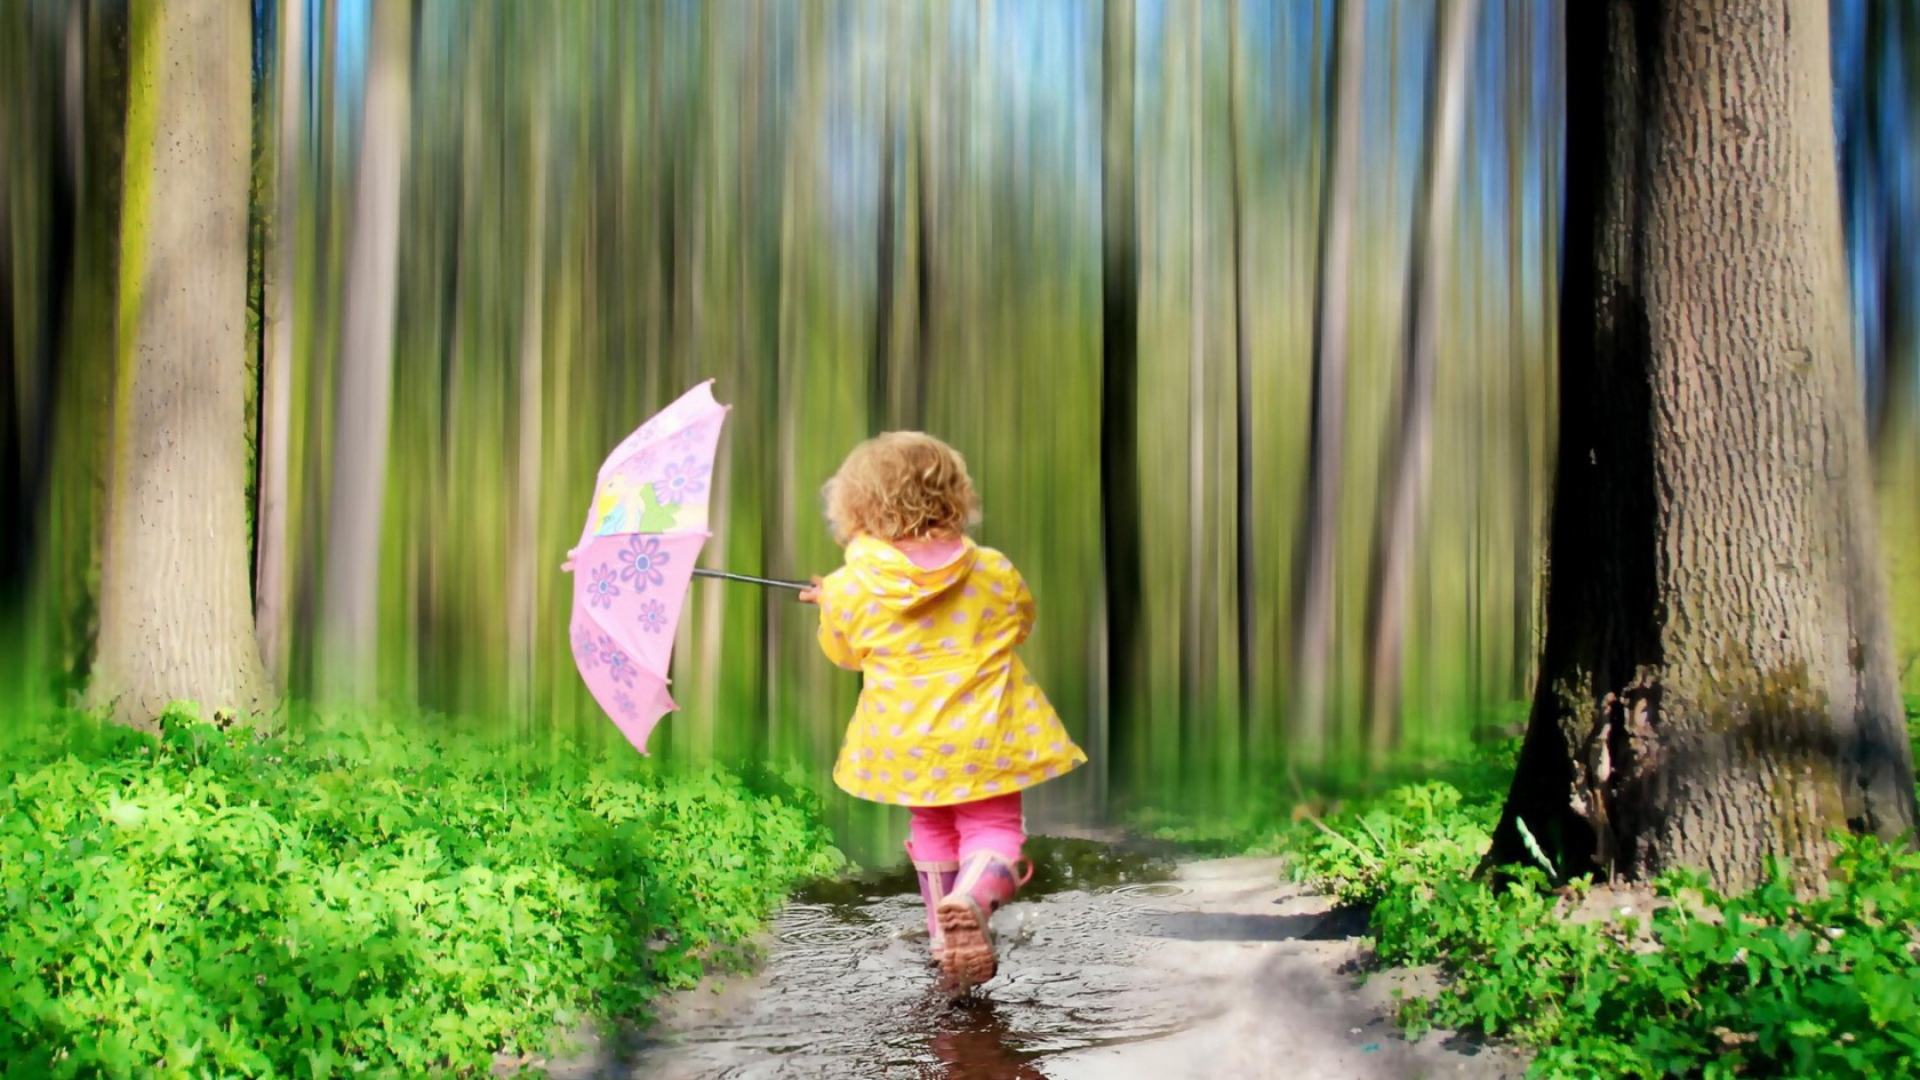 Child With Funny Pink Umbrella wallpaper 1920x1080